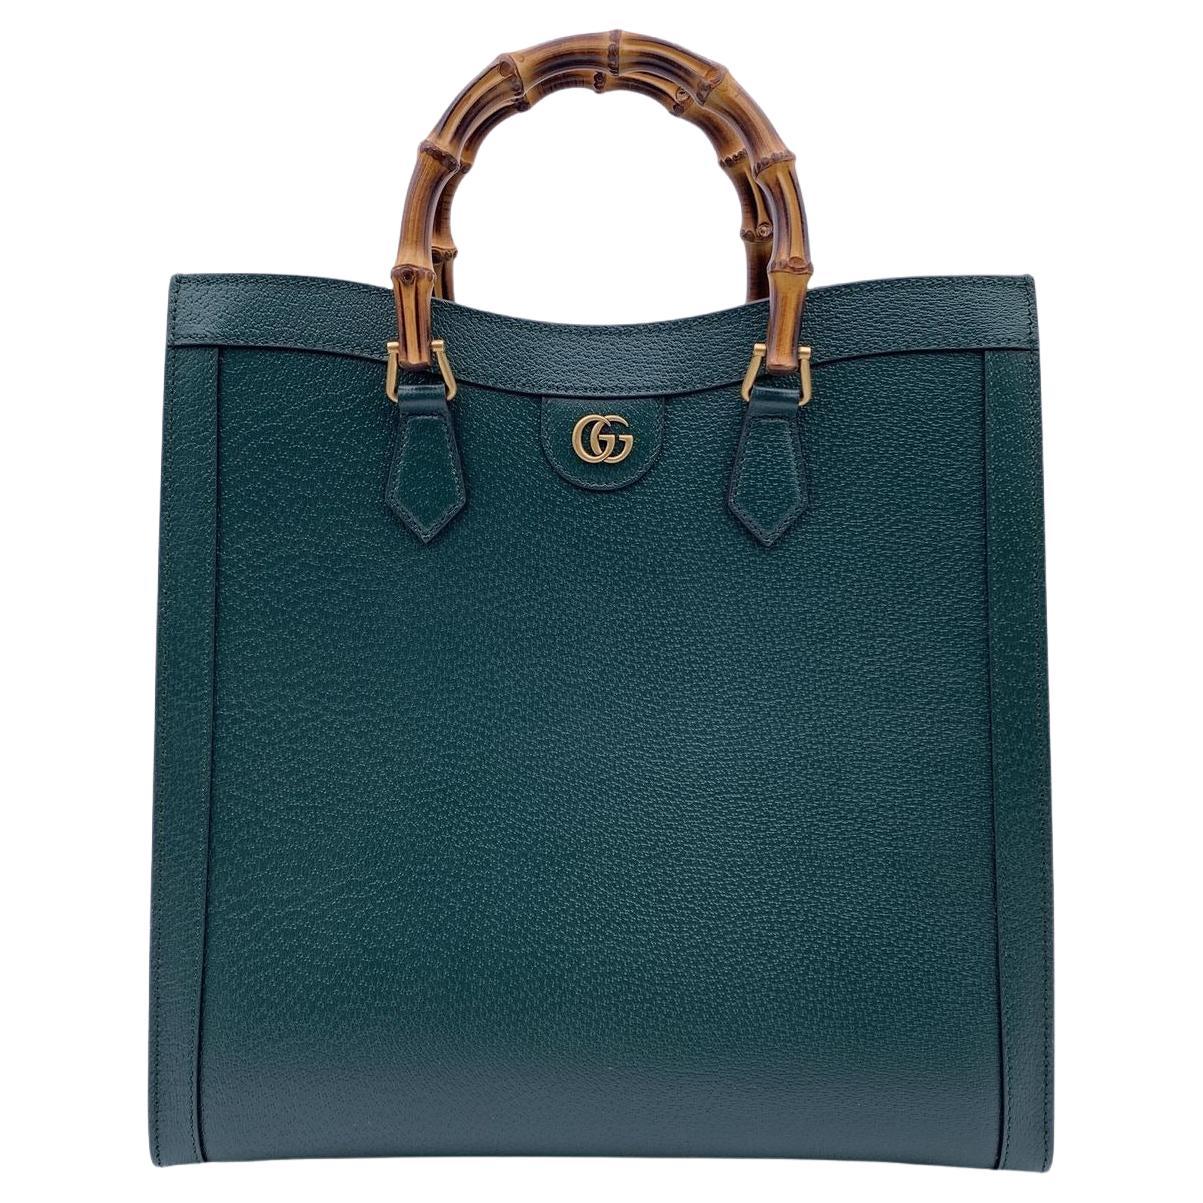 Gucci Green Leather Bamboo XL Princess Diana GG Tote Bag with Straps